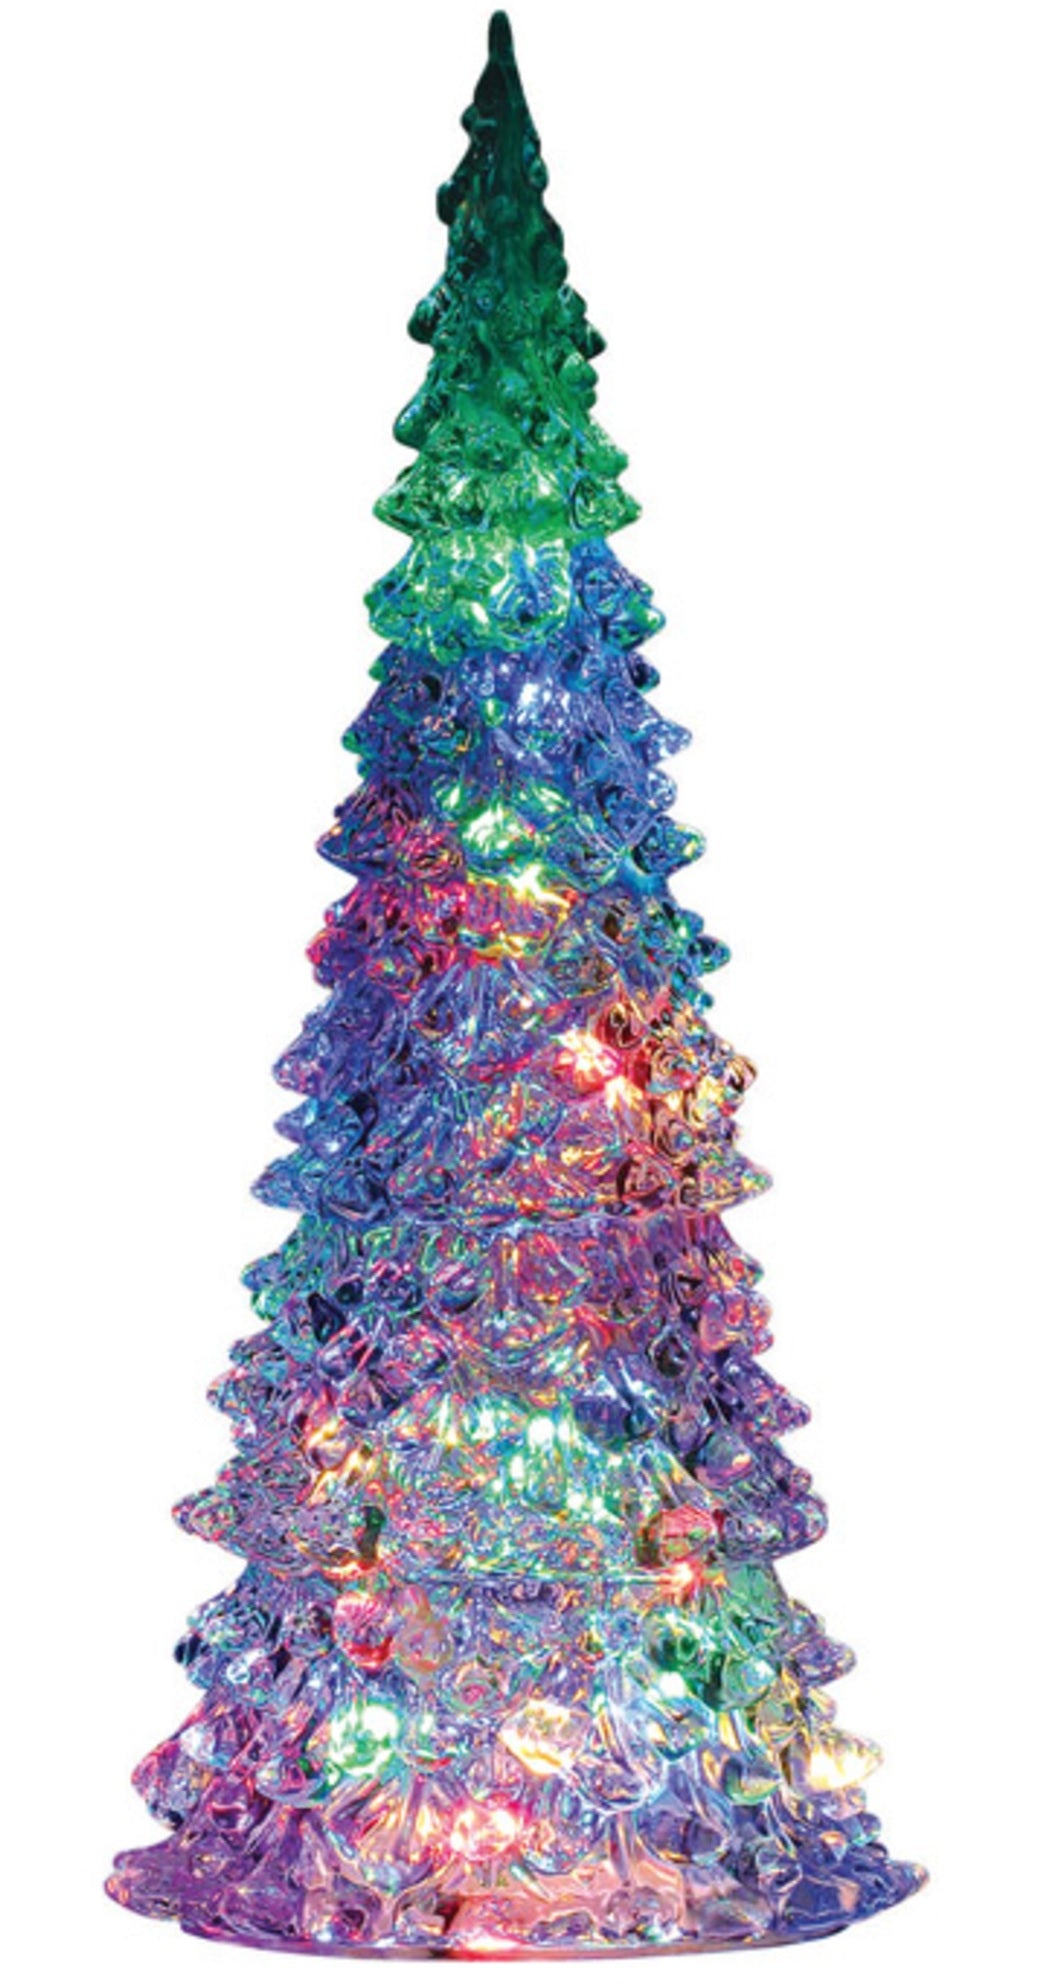 Lemax 94510 Large Lighted Crystal Christmas Tree, Multicolored